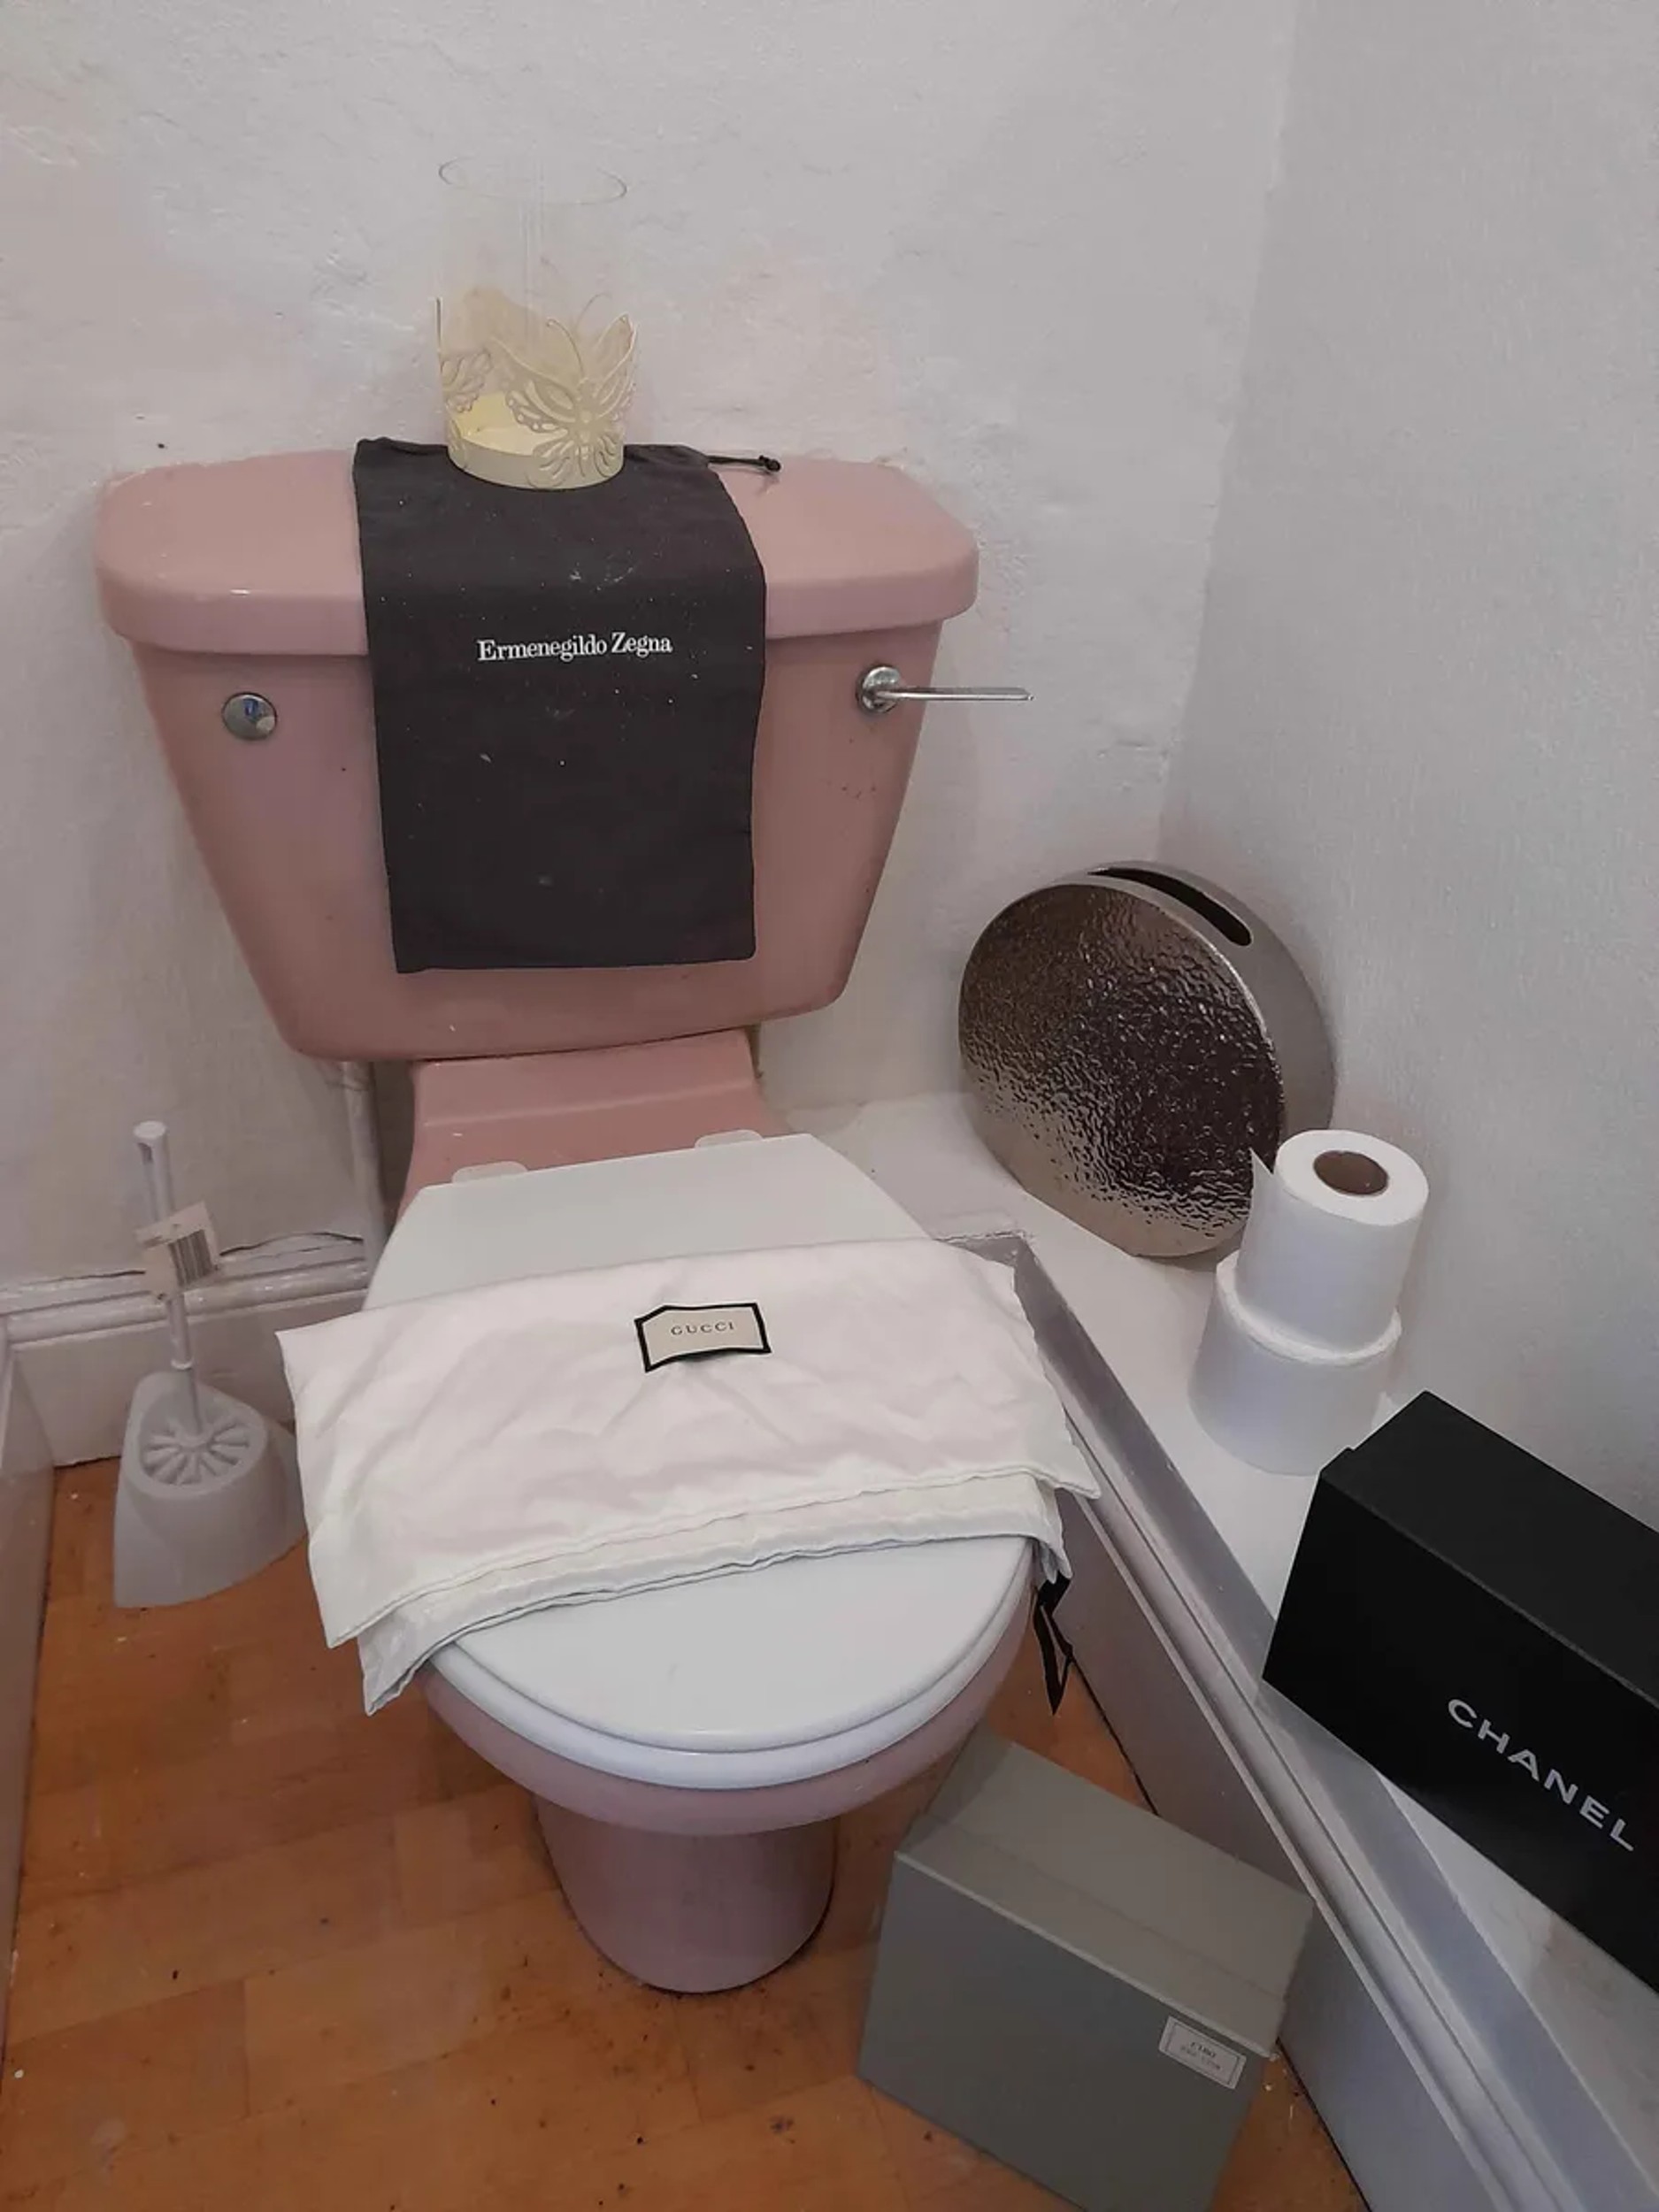 Various branded bags on the toilet